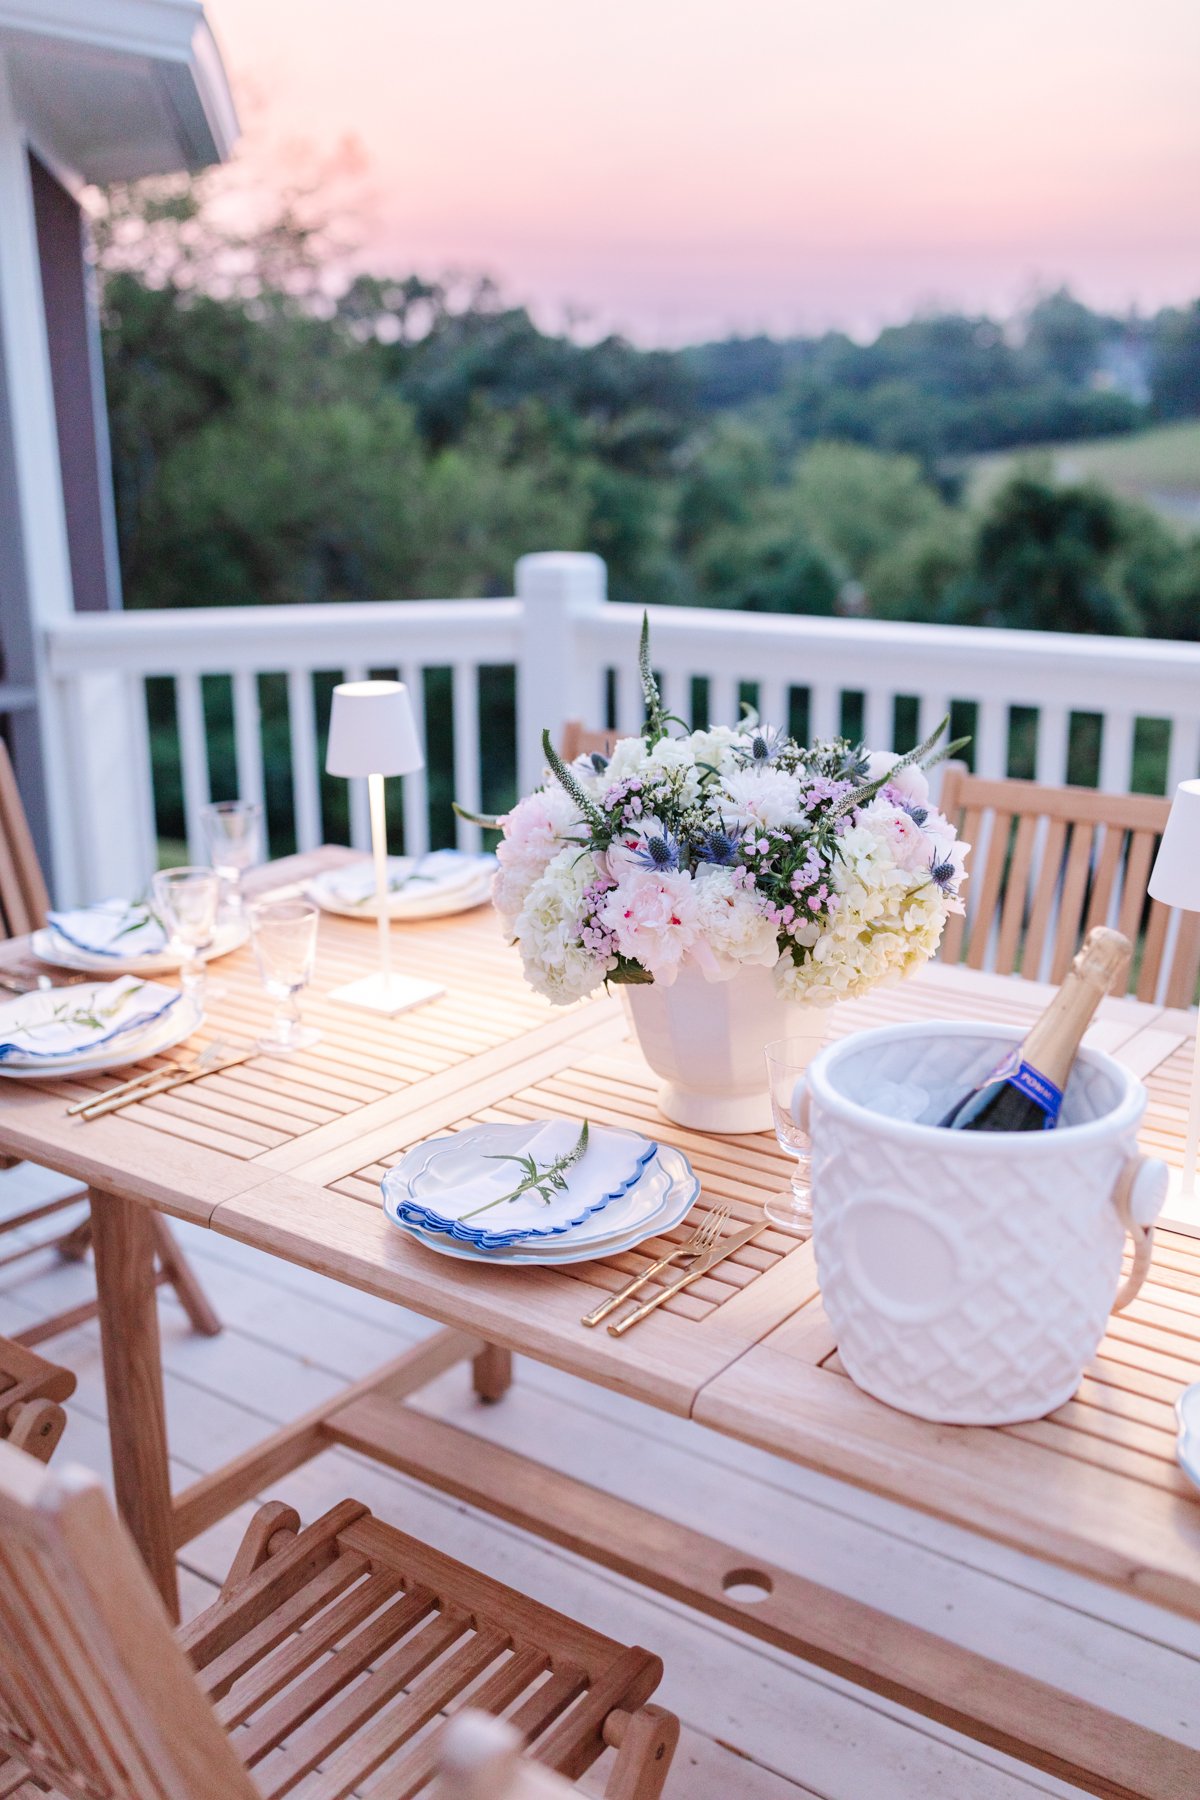 A wooden table set for dinner on a deck at sunset, perfect for outdoor living.